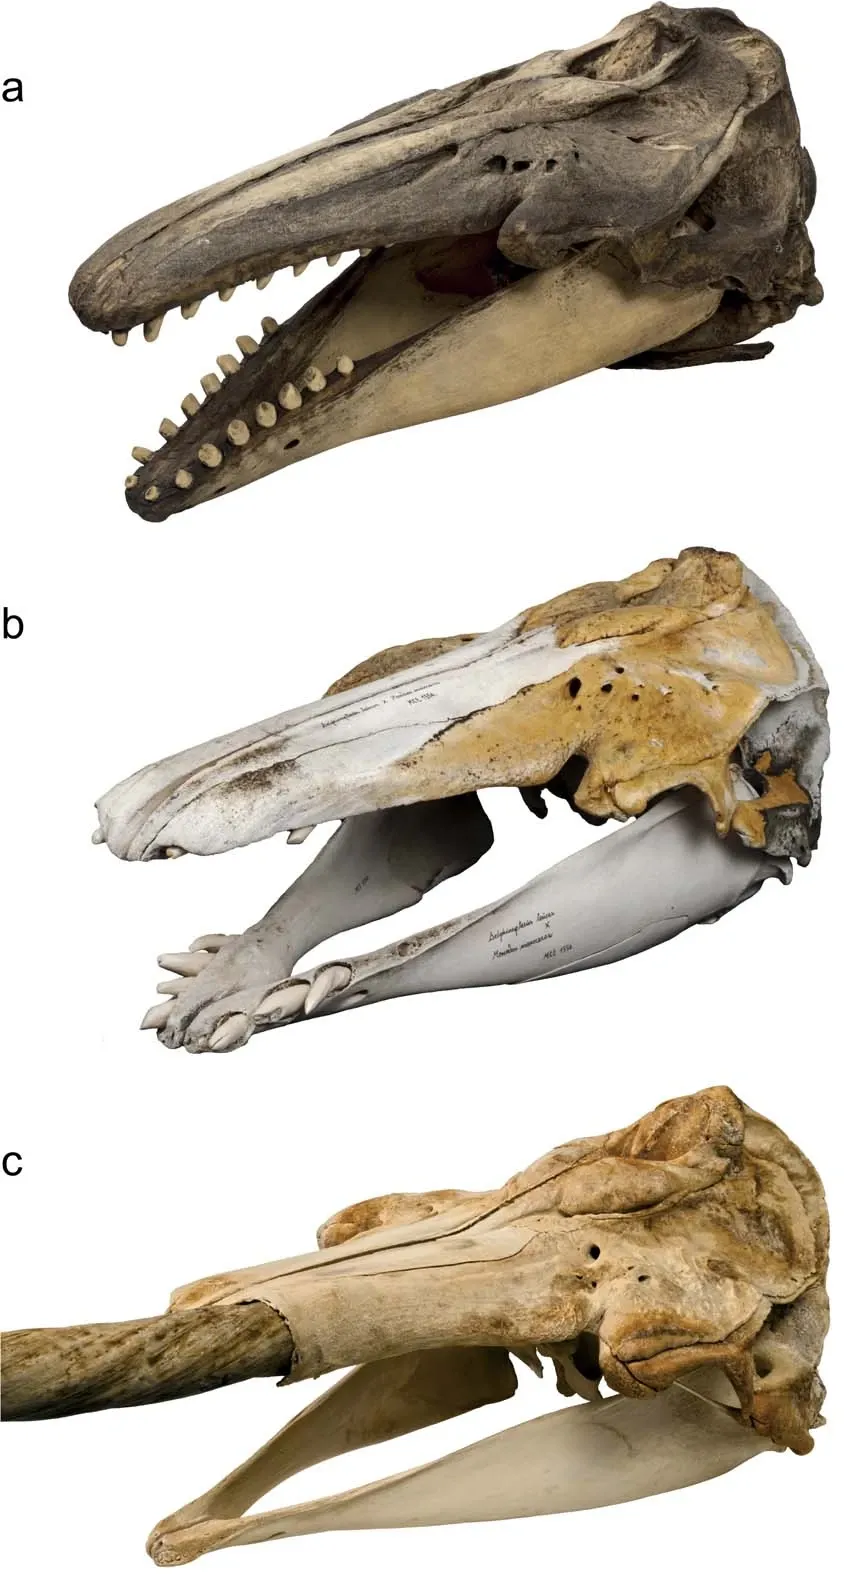 comparison between different cetacean skulls, with the hybrid narluga in the middle